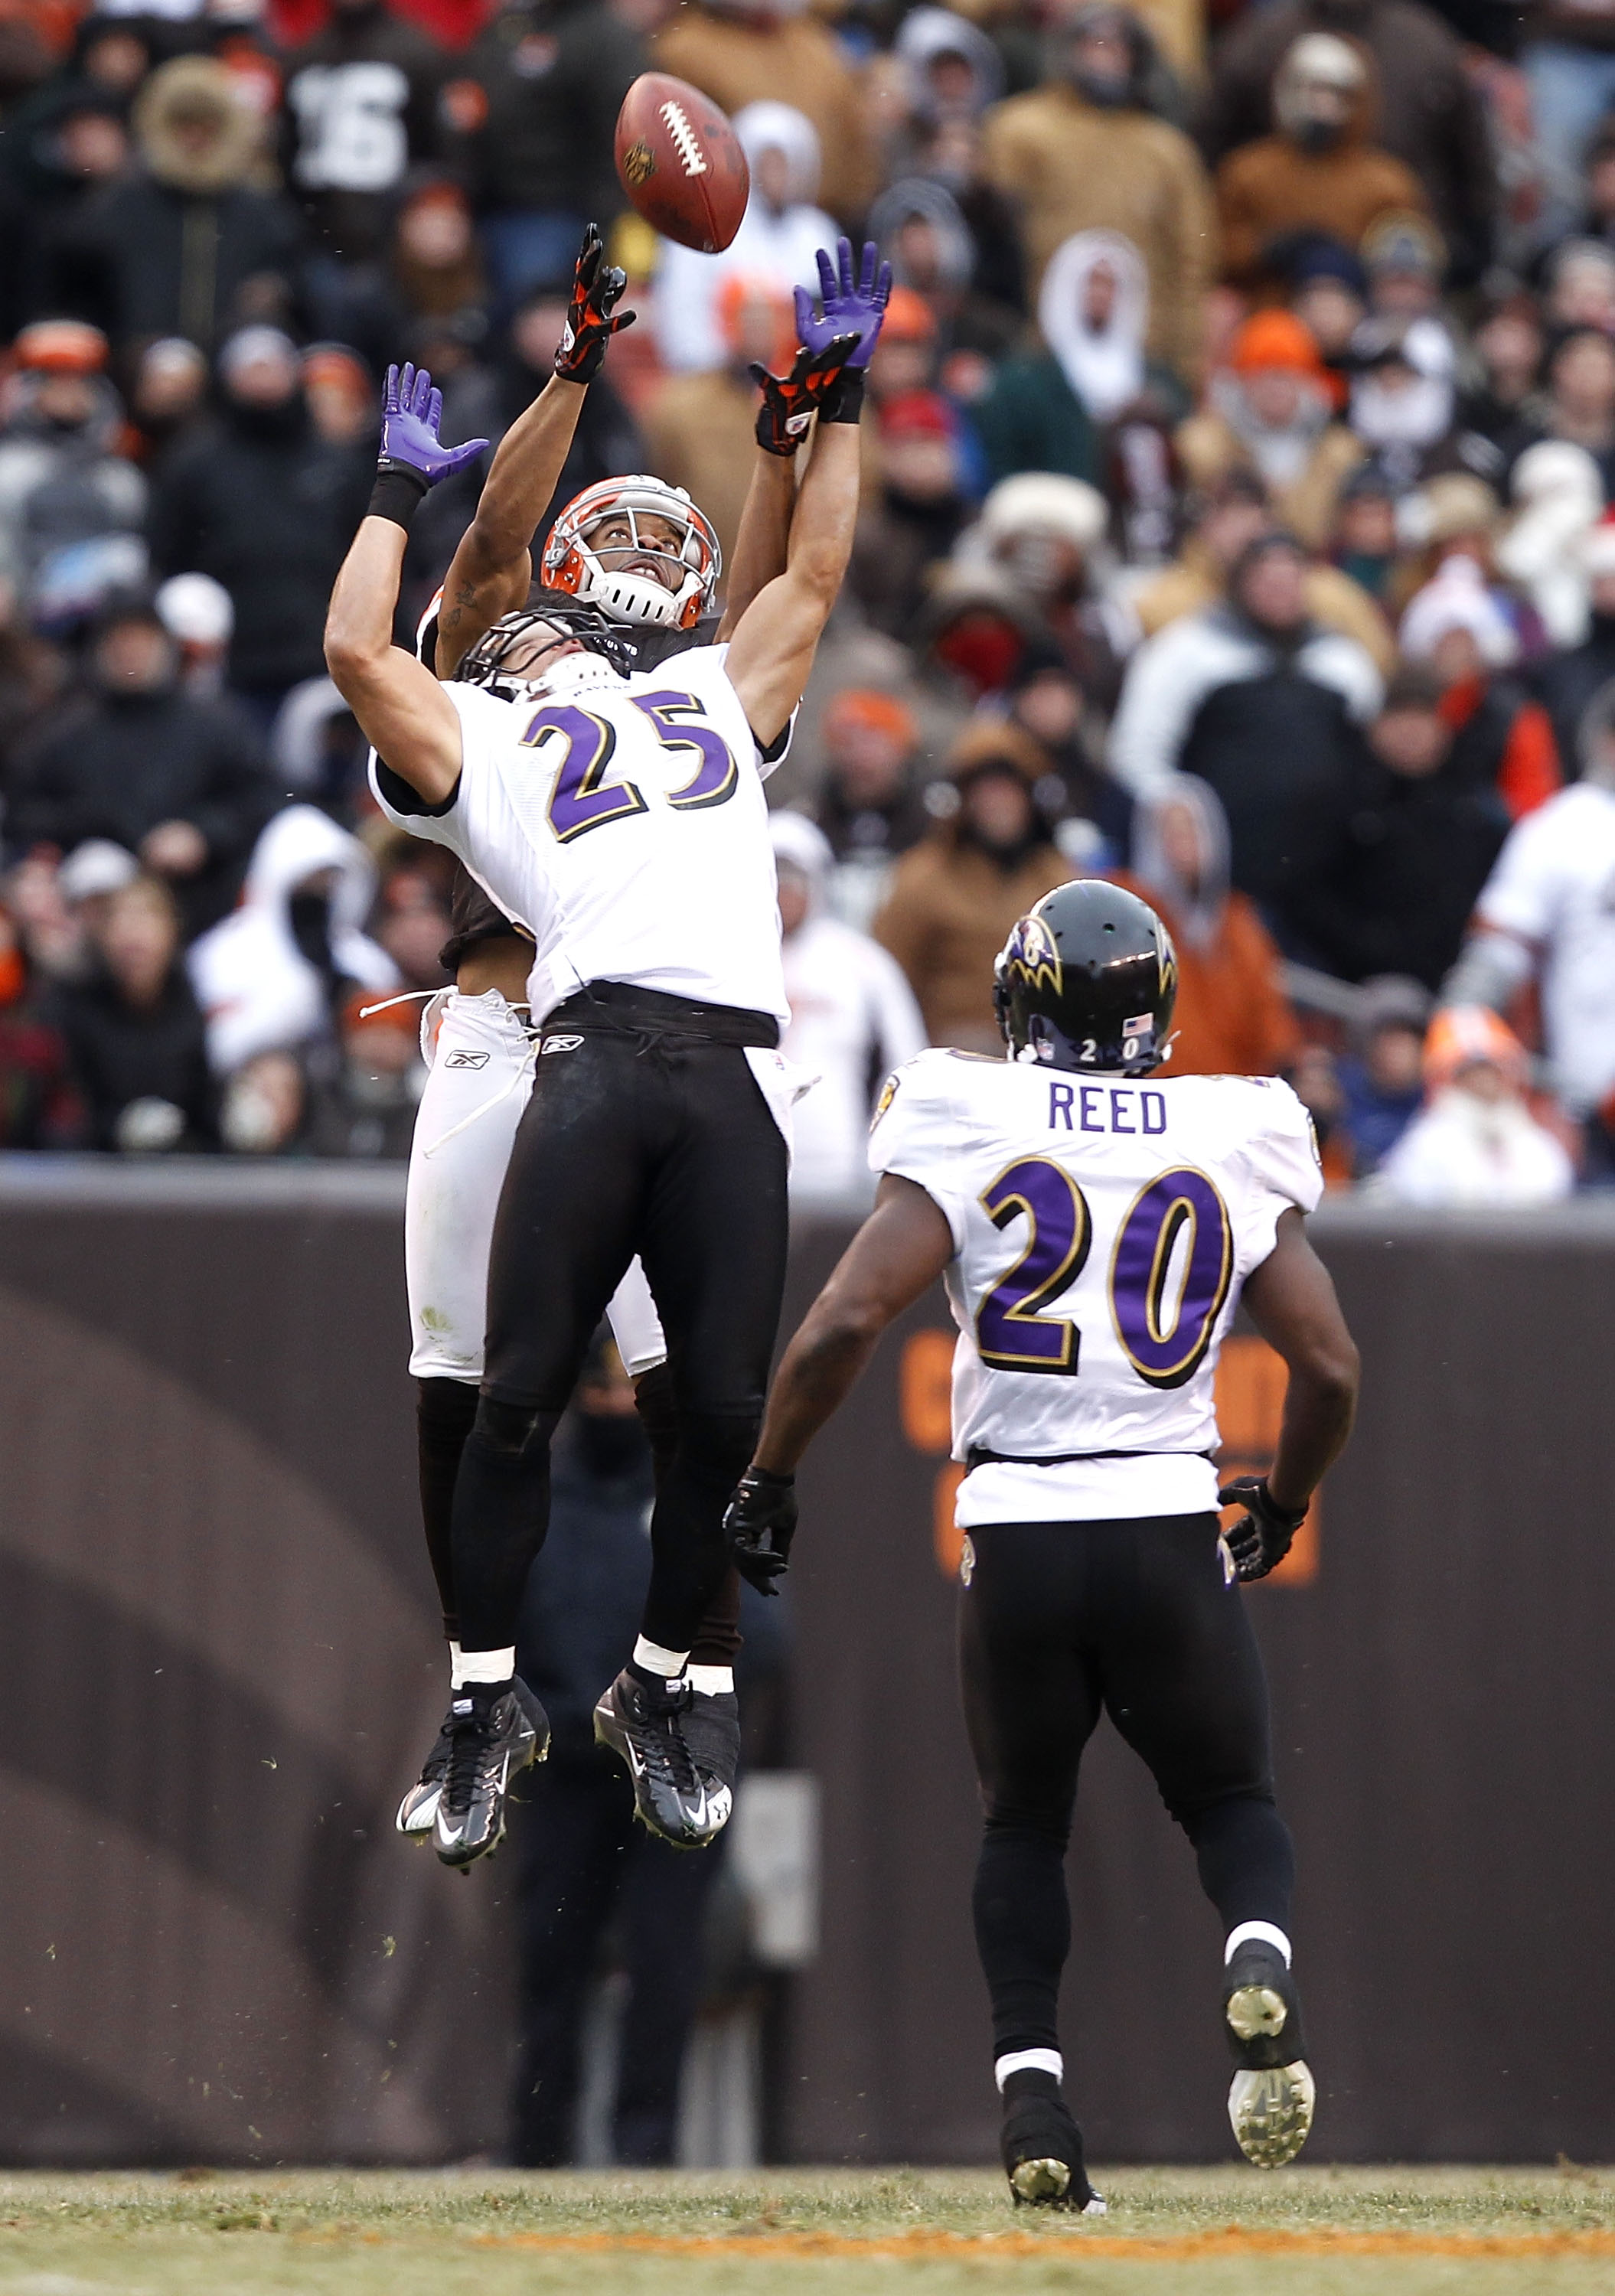 CLEVELAND - DECEMBER 26:  Safety Chris Carr #25 of the Baltimore Ravens jumps for the ball as safety Ed Reed #20 looks on with wide receiver Chansi Stuckey #83 of the Cleveland Browns at Cleveland Browns Stadium on December 26, 2010 in Cleveland, Ohio.  (